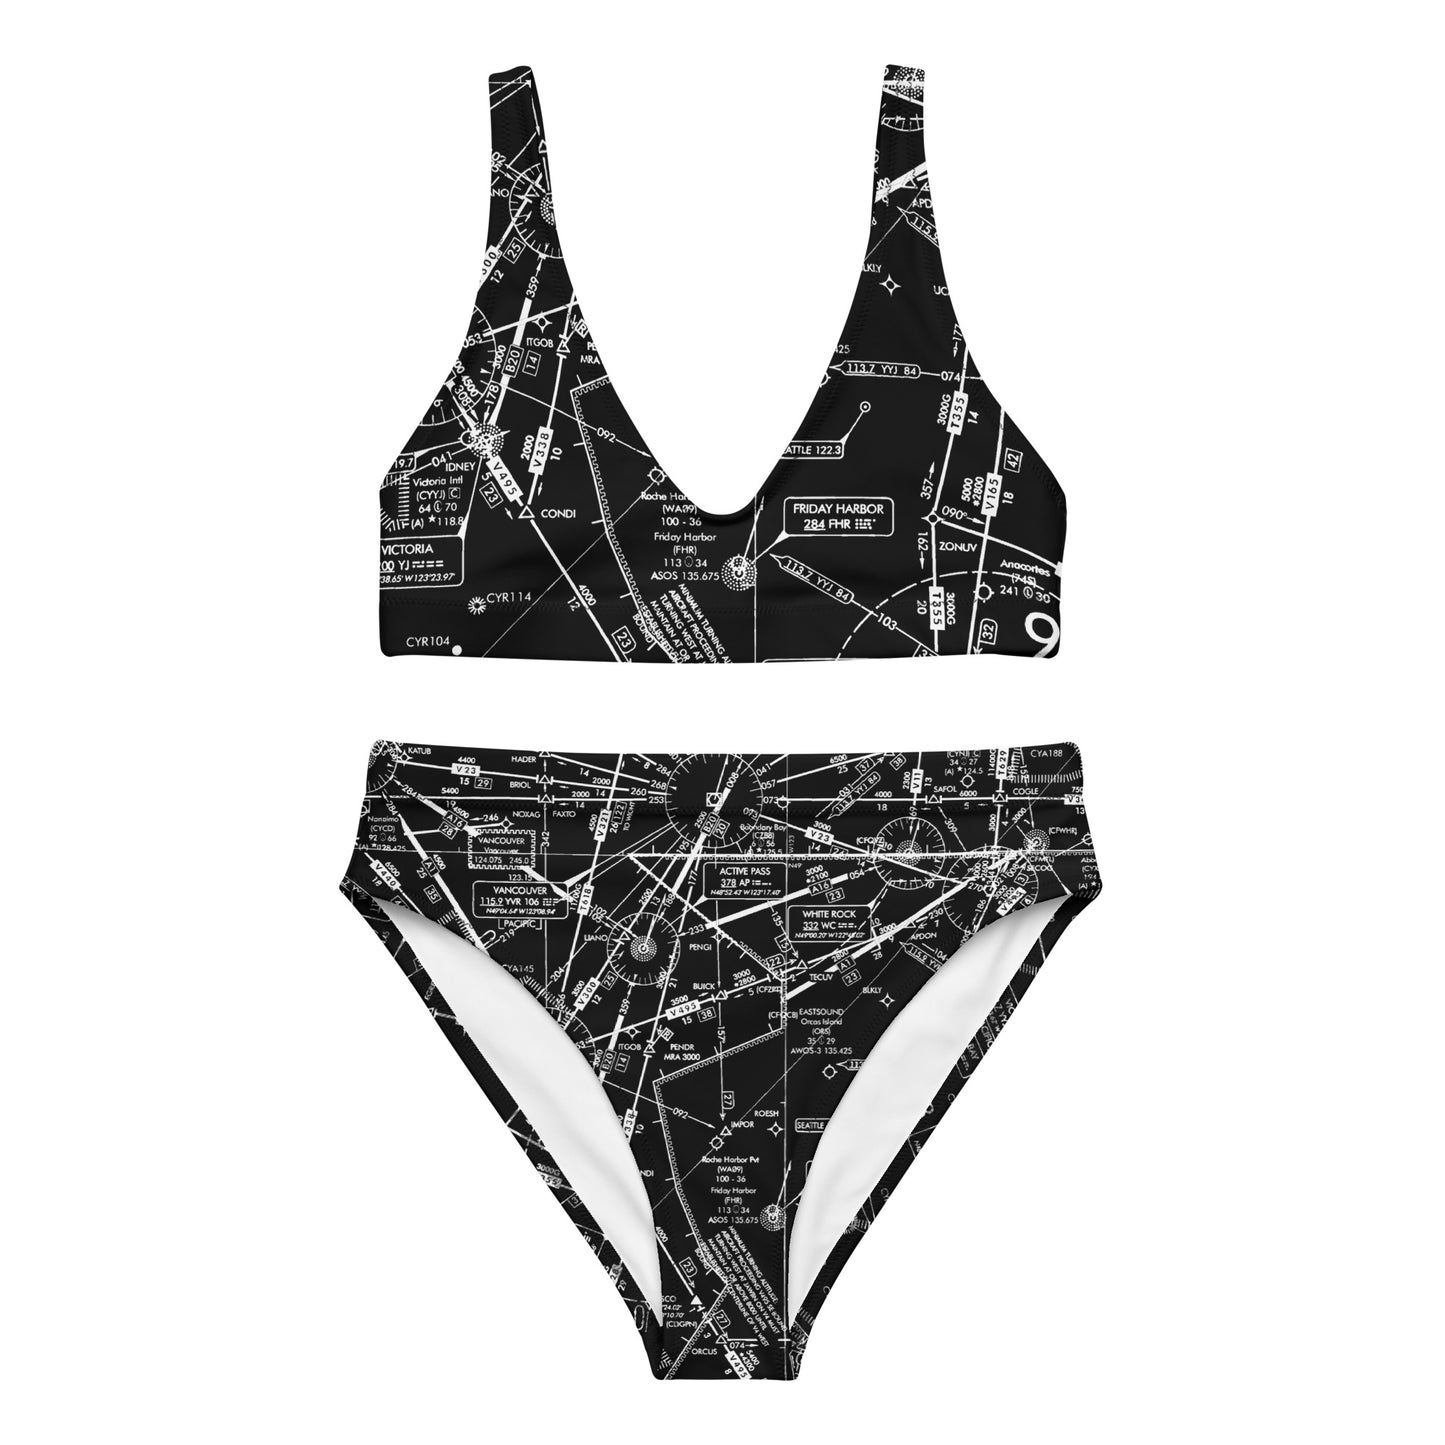 Enroute Low Altitude Chart recycled high-waisted bikini (black)